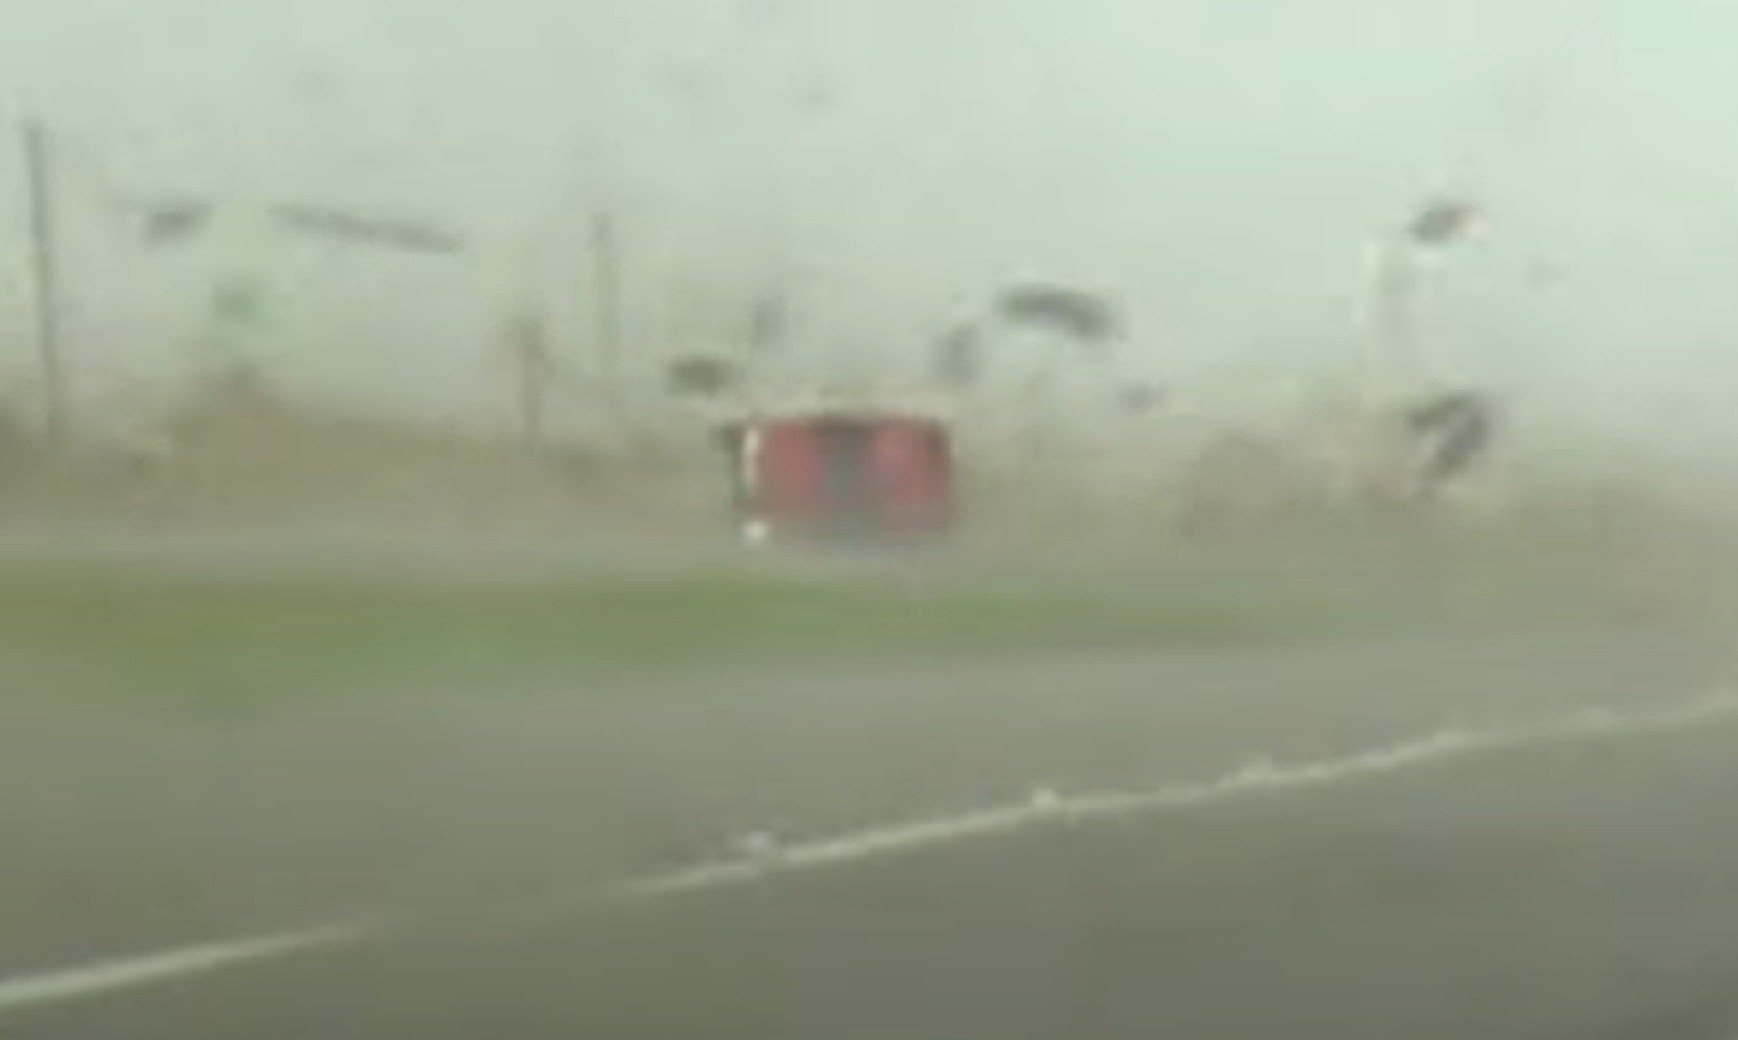 Texas Tornado Video Showing Red Truck Caught in Twister Viewed 1M Times